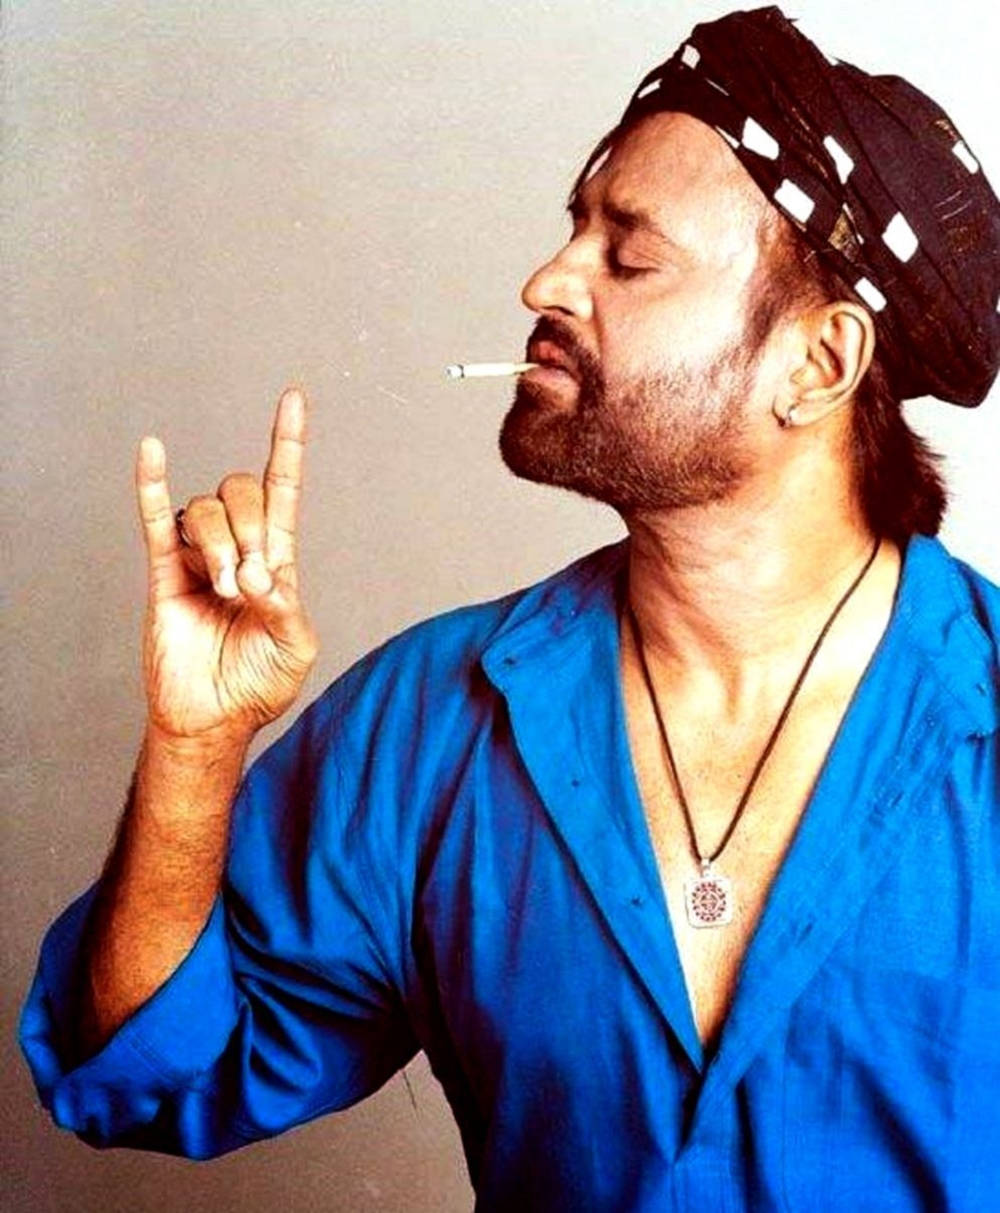 Rajinikanthrock And Roll: Rajinikanth Rock And Roll (in Swedish, Rajinikanth Rock Och Roll) Would Be A Great Choice For Computer Or Mobile Wallpaper! The Famous Indian Actor Has A Massive Fan Following, And His Charismatic Presence Is Sure To Enliven Your Digital Backdrop. So Why Wait? Download Rajinikanth Rock And Roll Wallpaper Now! Wallpaper